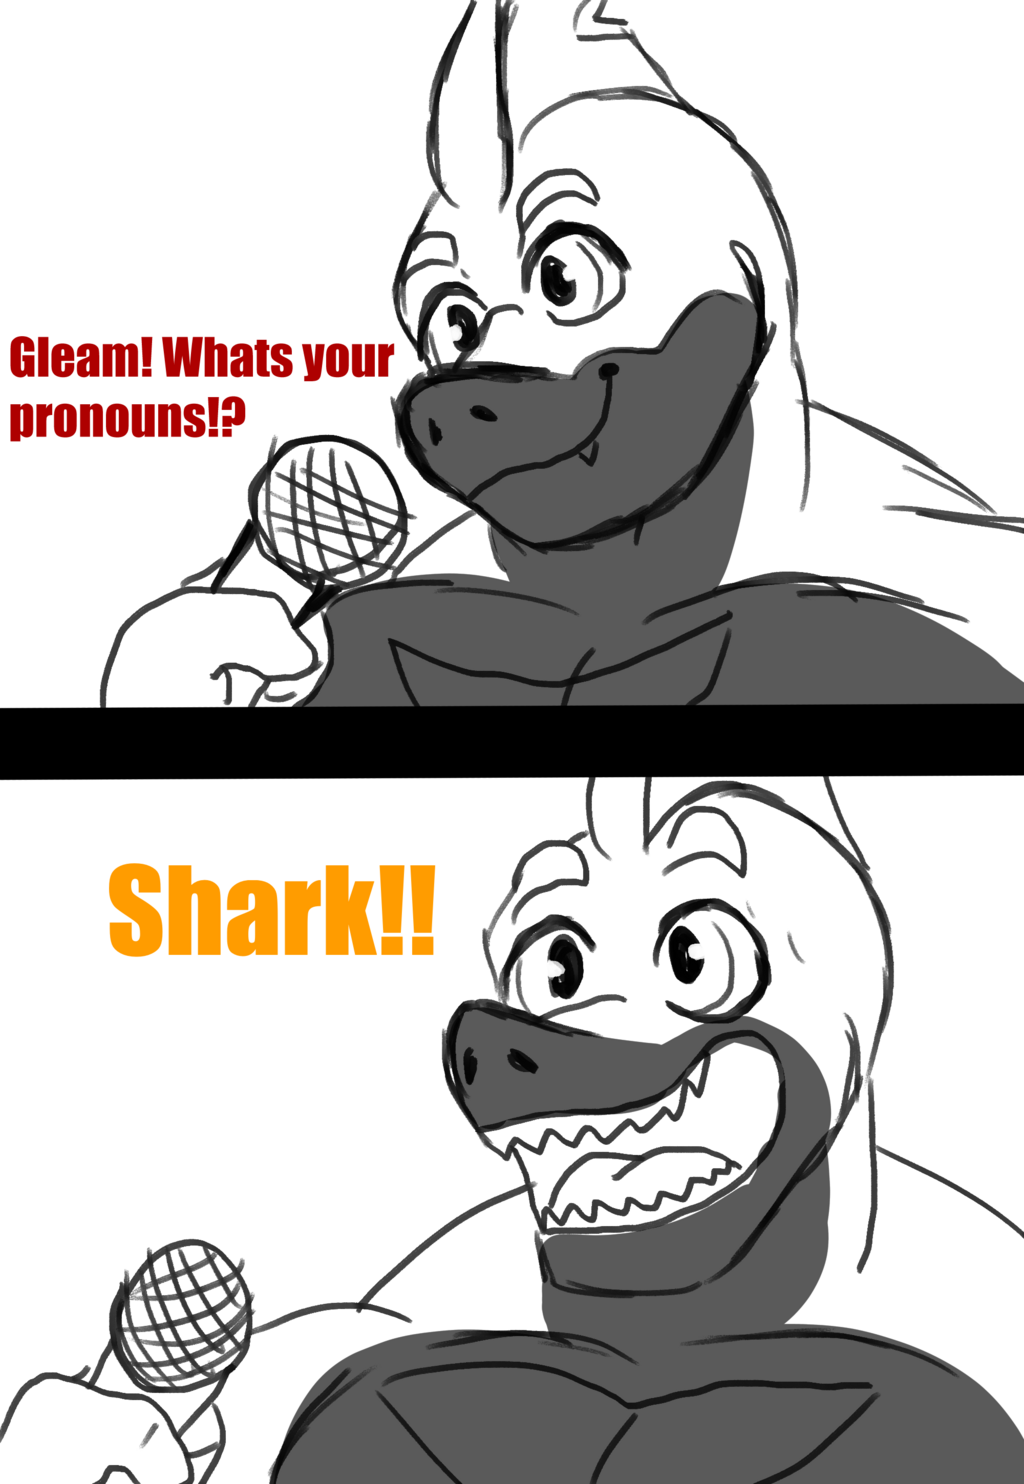 Gleam thinks pronouns are fun (Art by Acrasial)